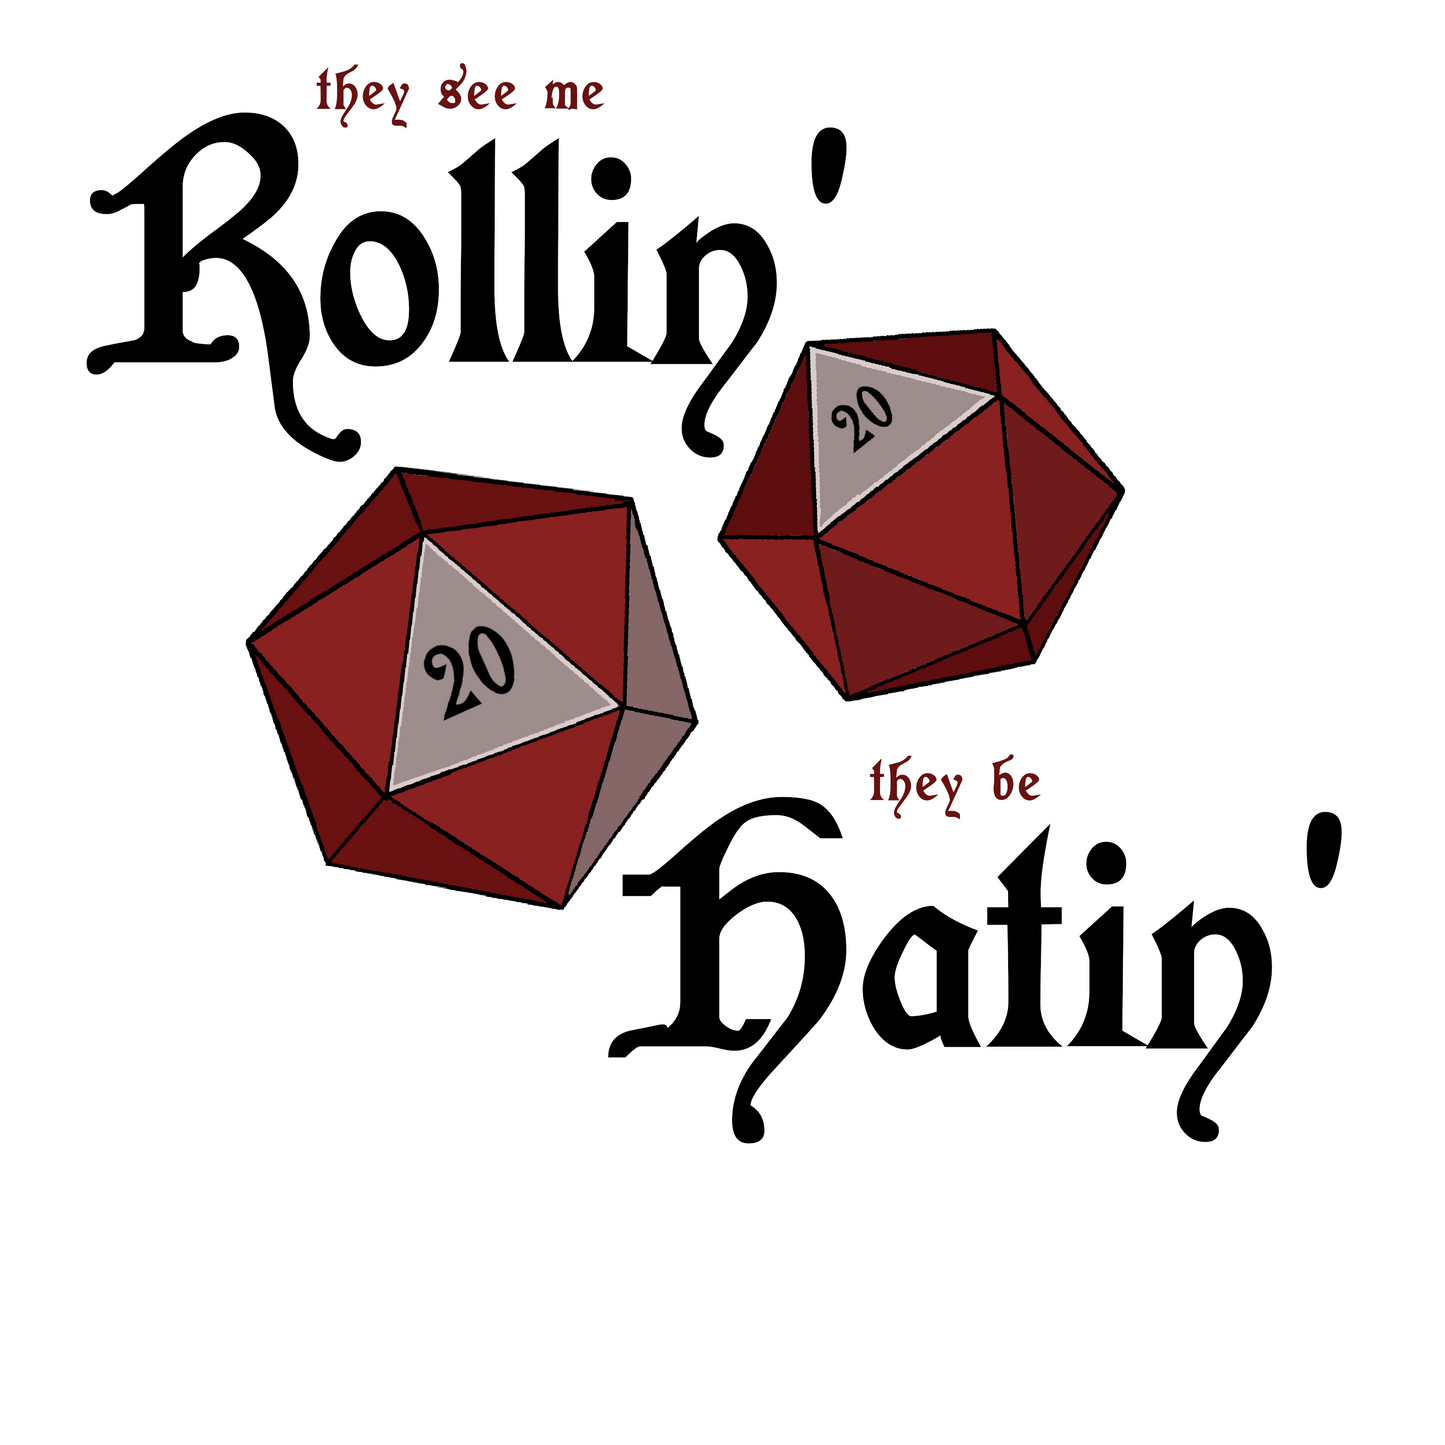 "See Me Rollin'" Graphic Tee Shirt (RPG, Dungeons & Dragons)